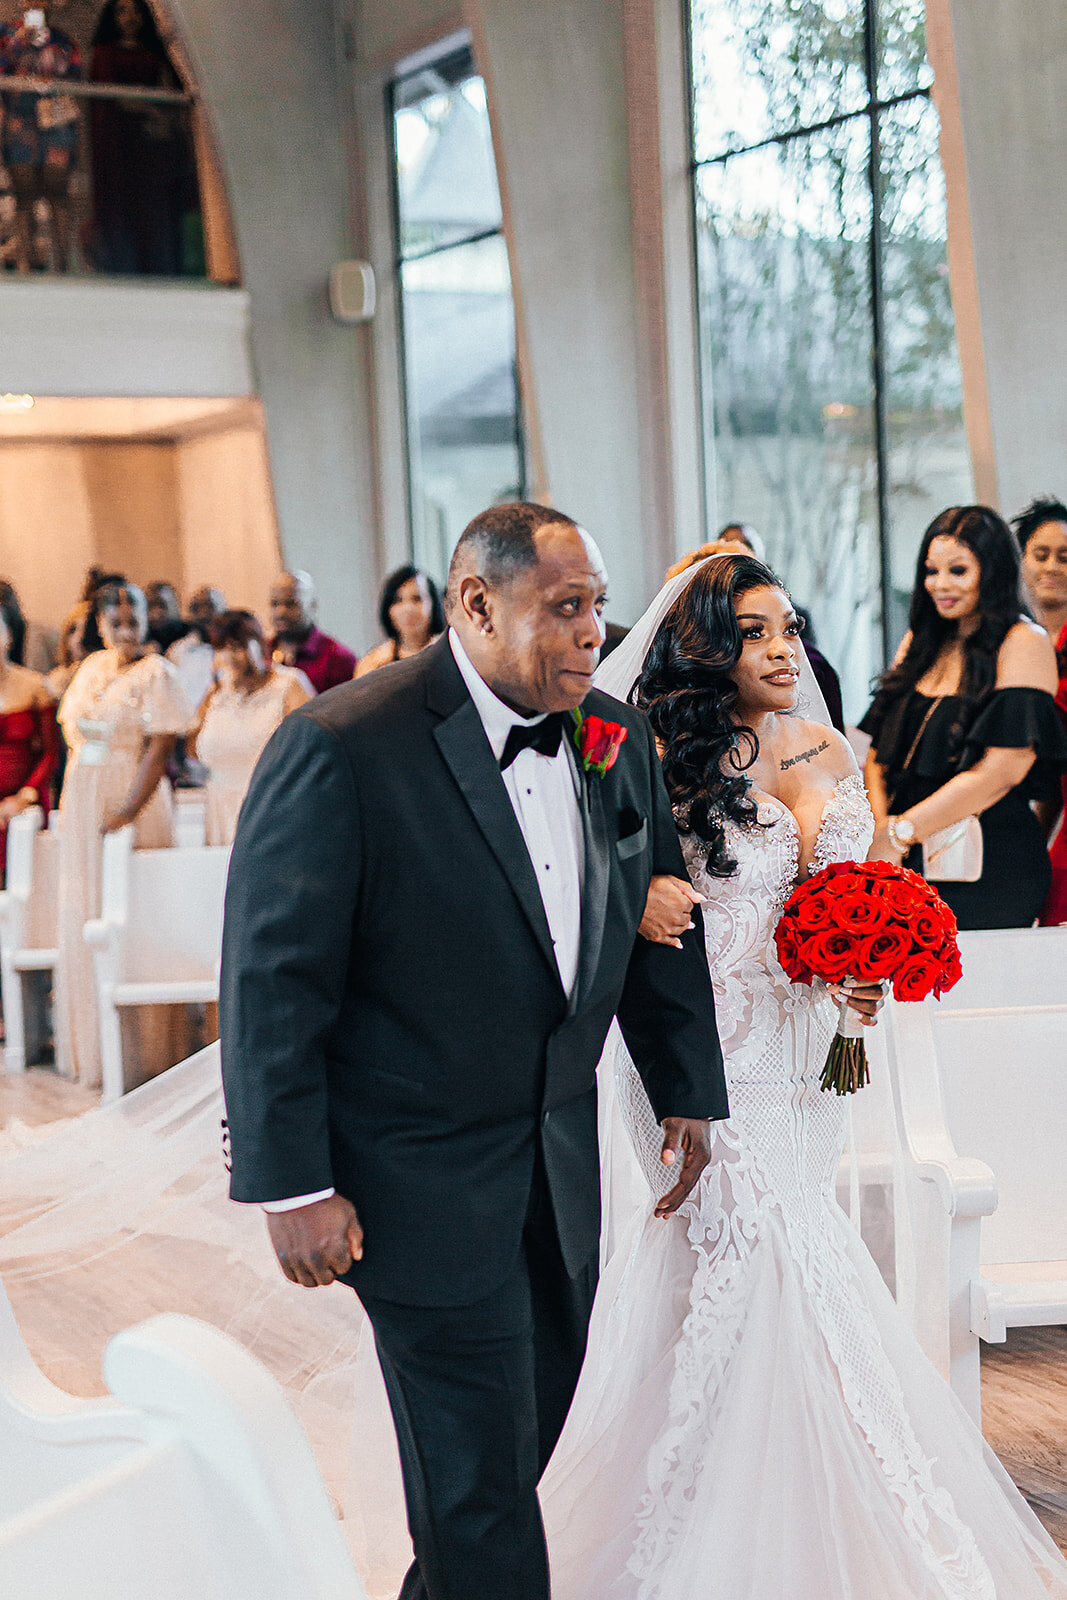 Father of the bride walking his daughter with red roses down the aisle